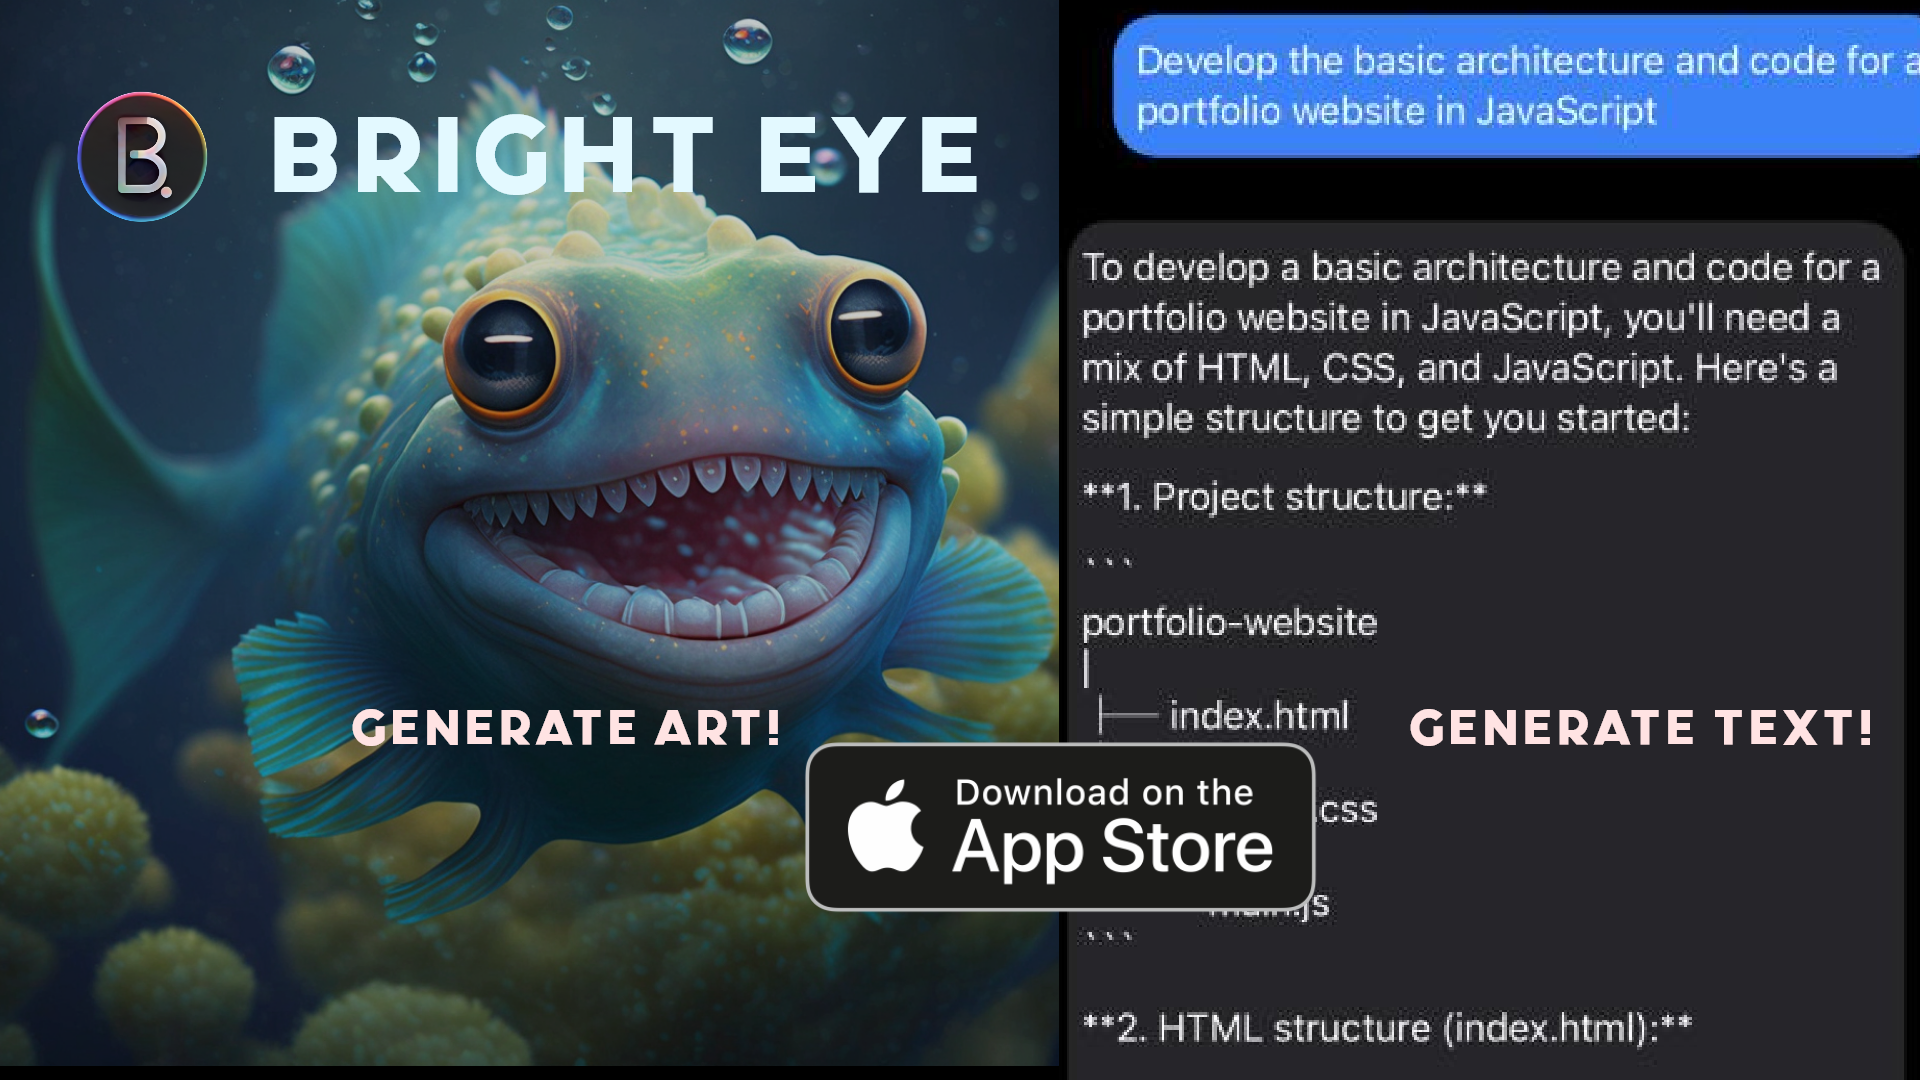 Bright EyeAn AI app for generating text images code stories